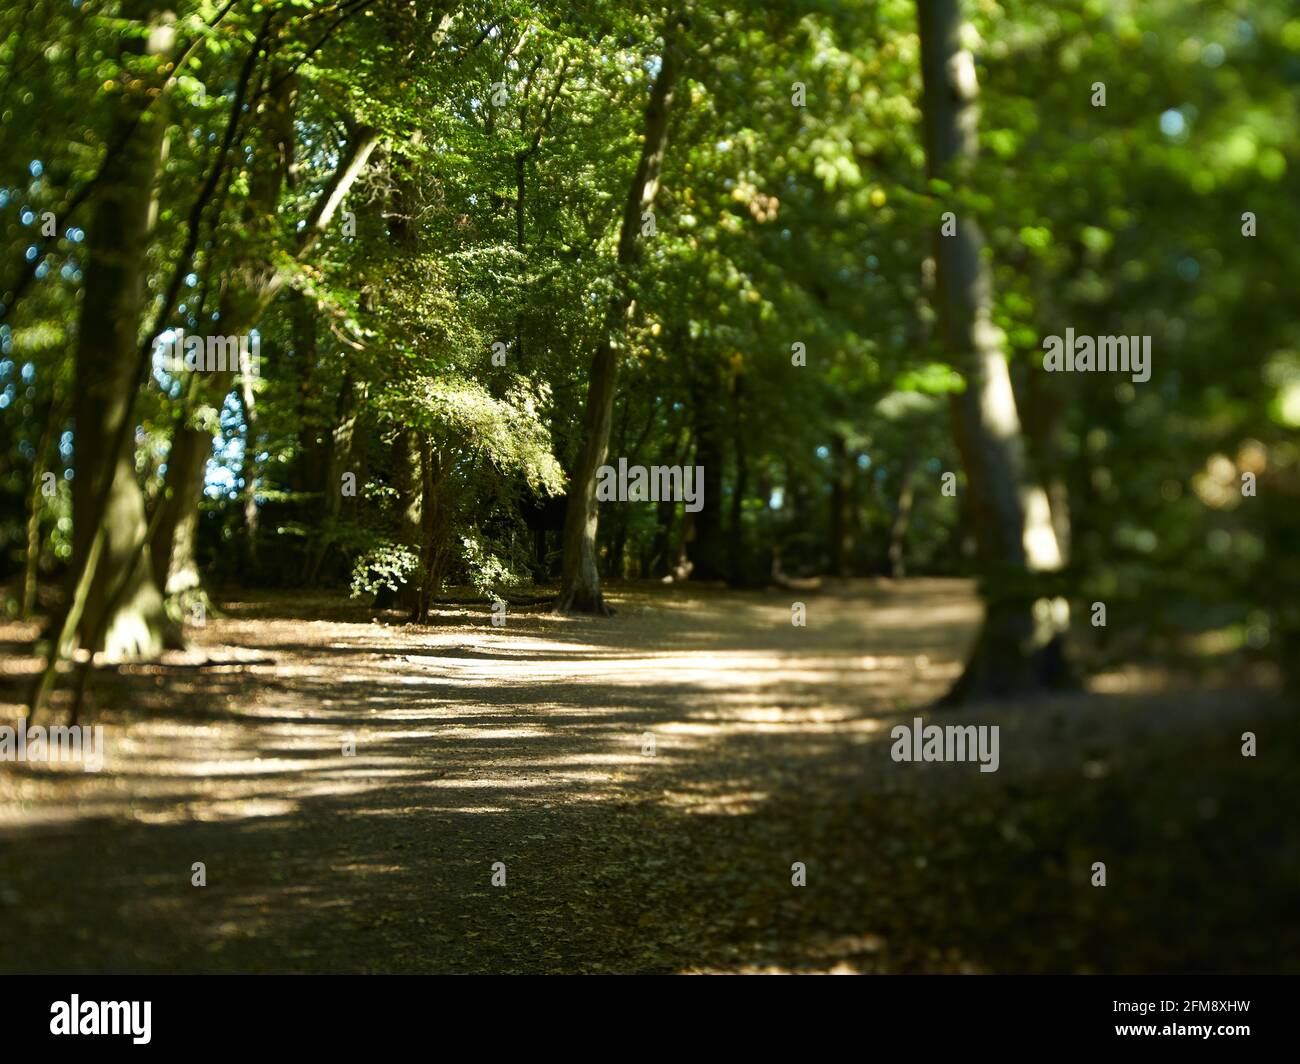 A dream-like view of an avenue through Highgate Woods in dappled sunshine, inviting one to wander and explore the magical woodland. Stock Photo